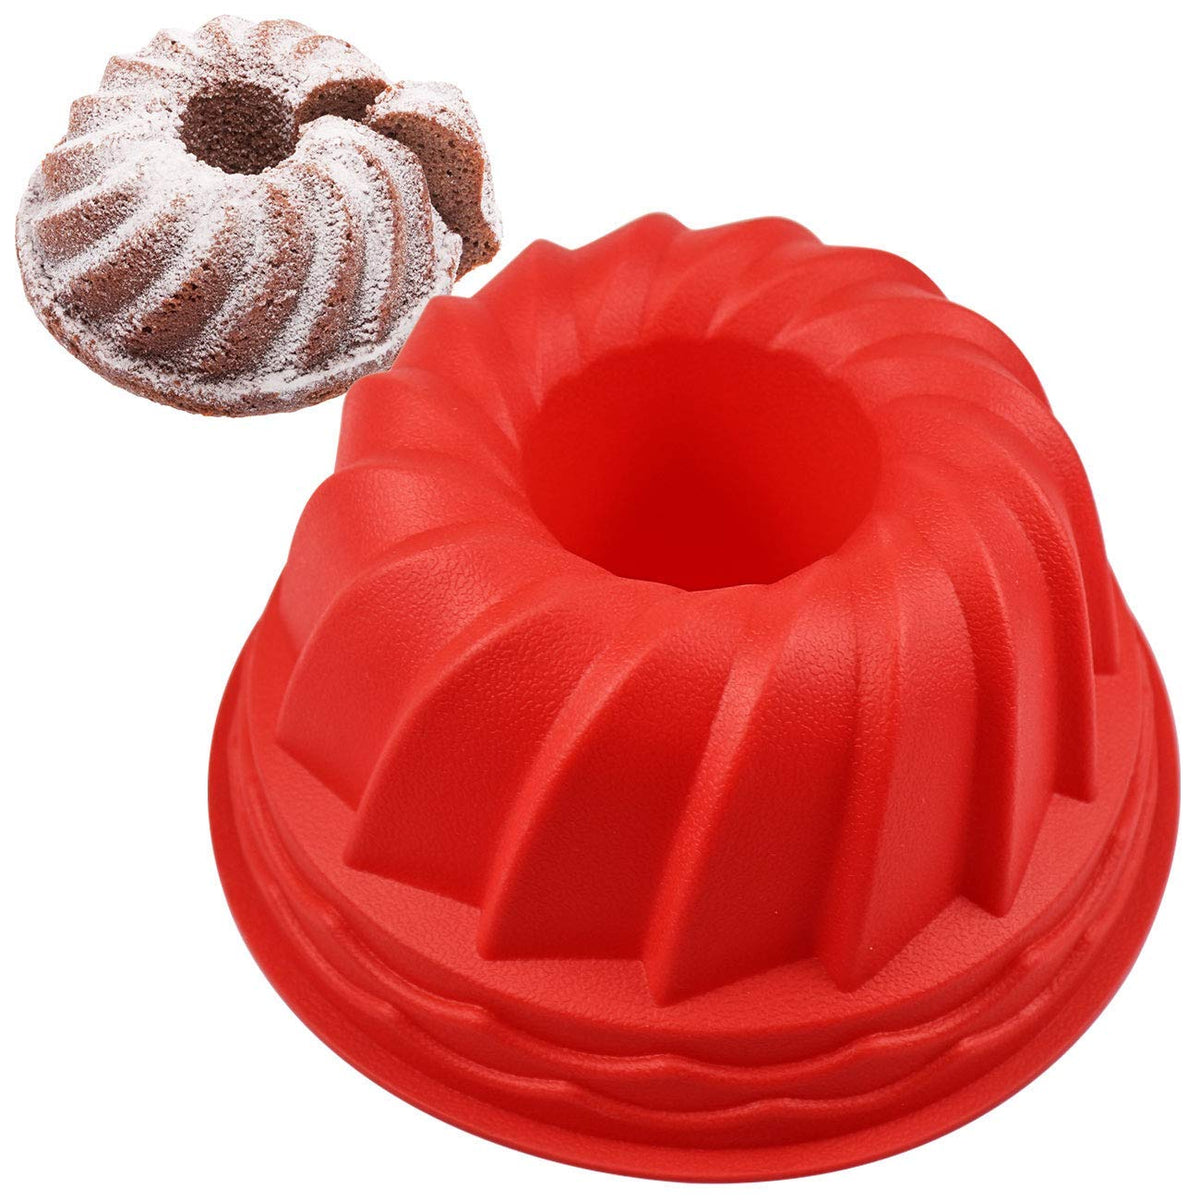 2 Pack Silicone Round Bread Fluted Cake Pan,Non-stick 9 Inch Fluted Tu –  SHANULKA Home Decor